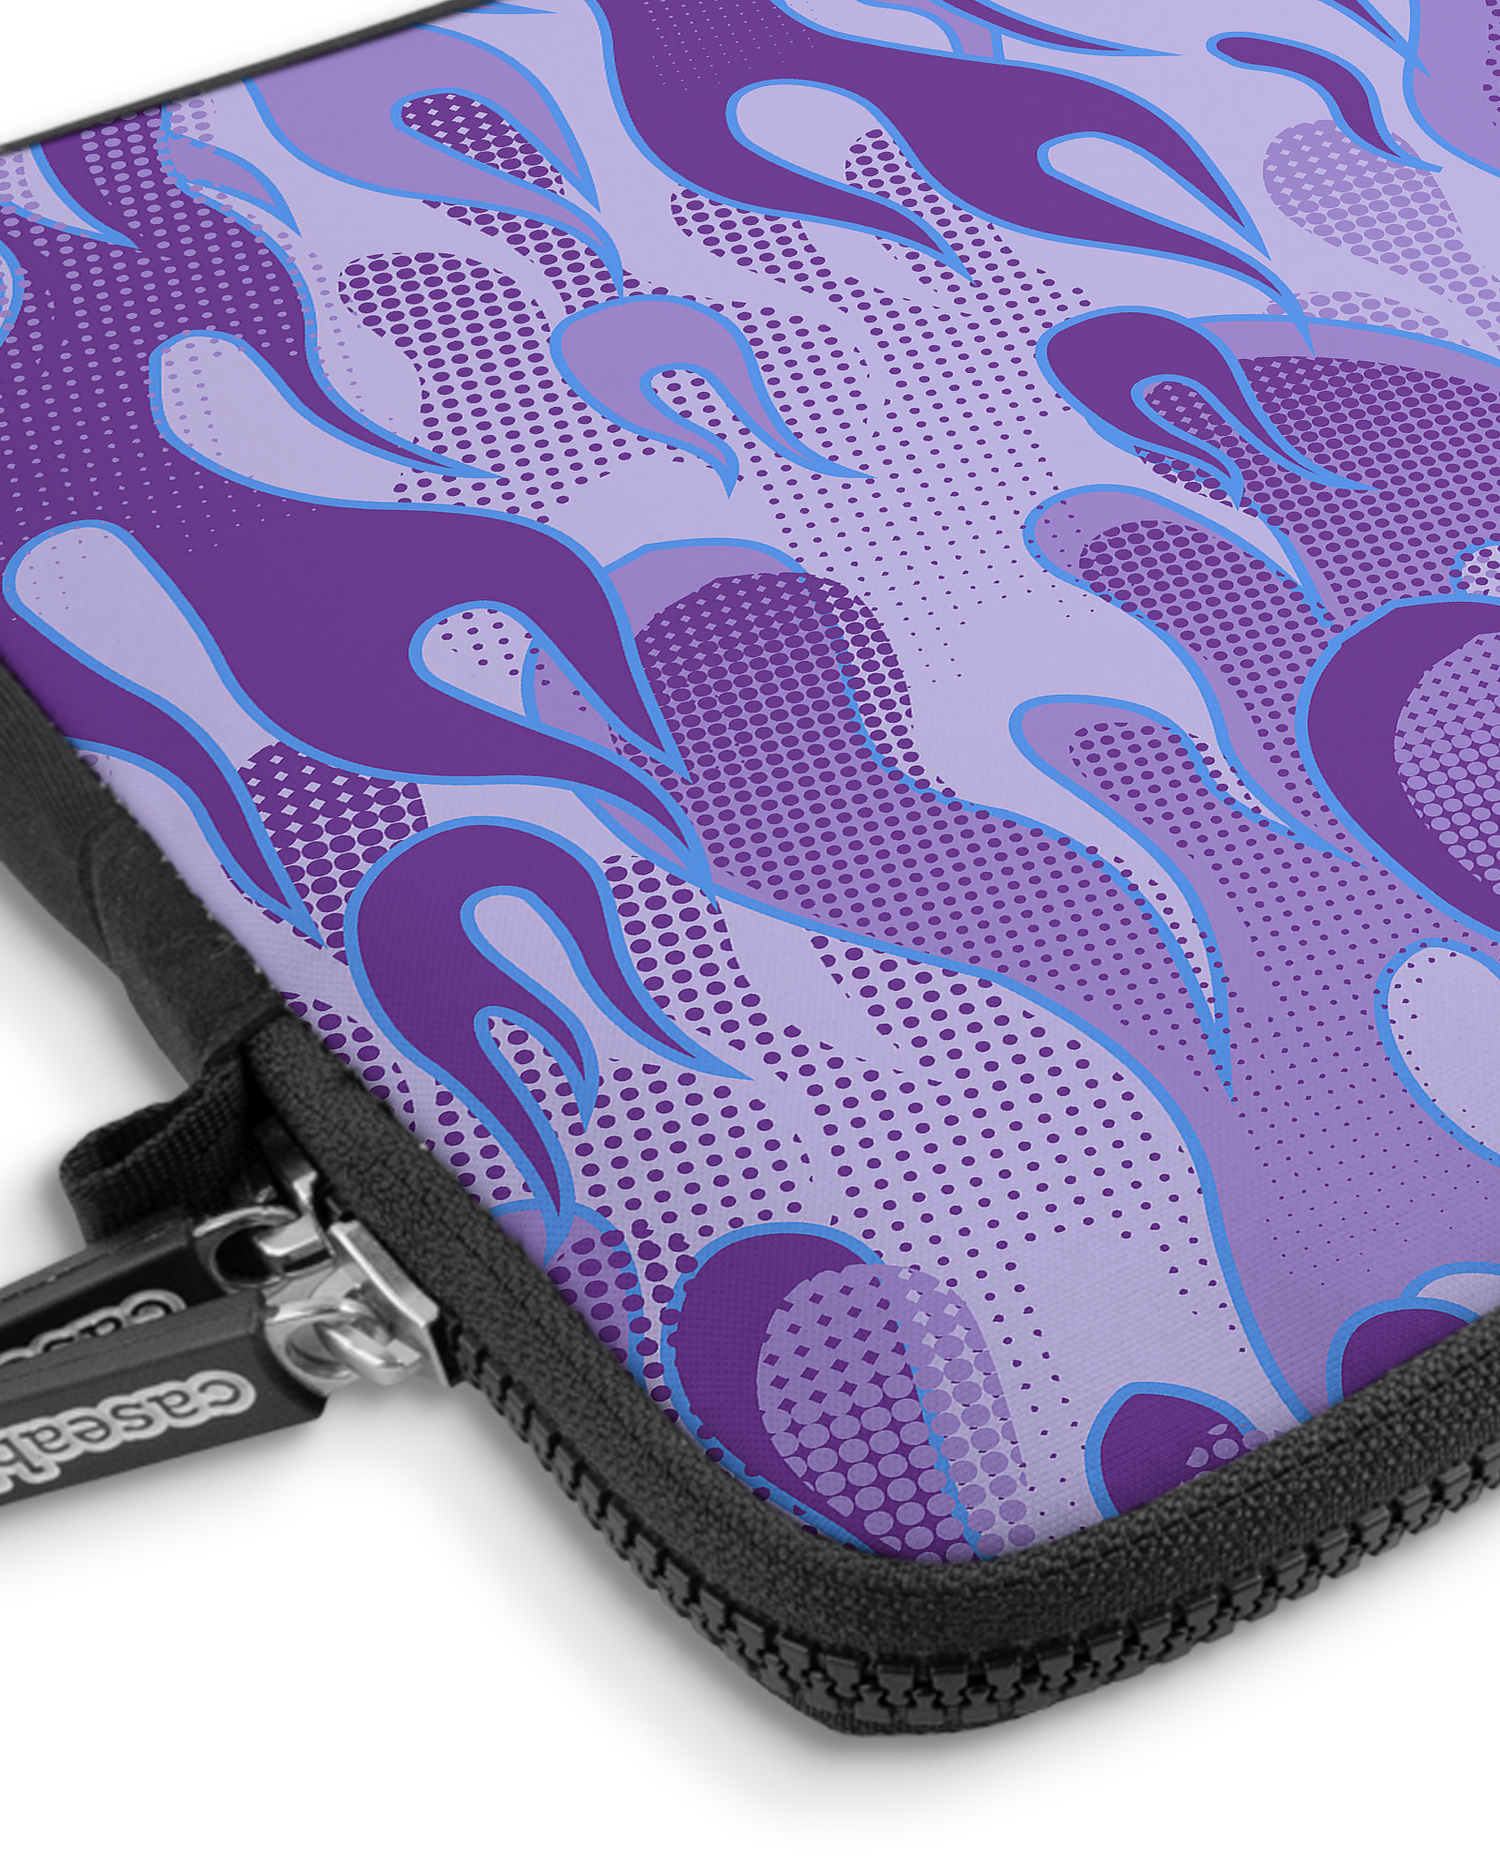 Purple Flames Premium Laptop Bag 13 inch with device inside